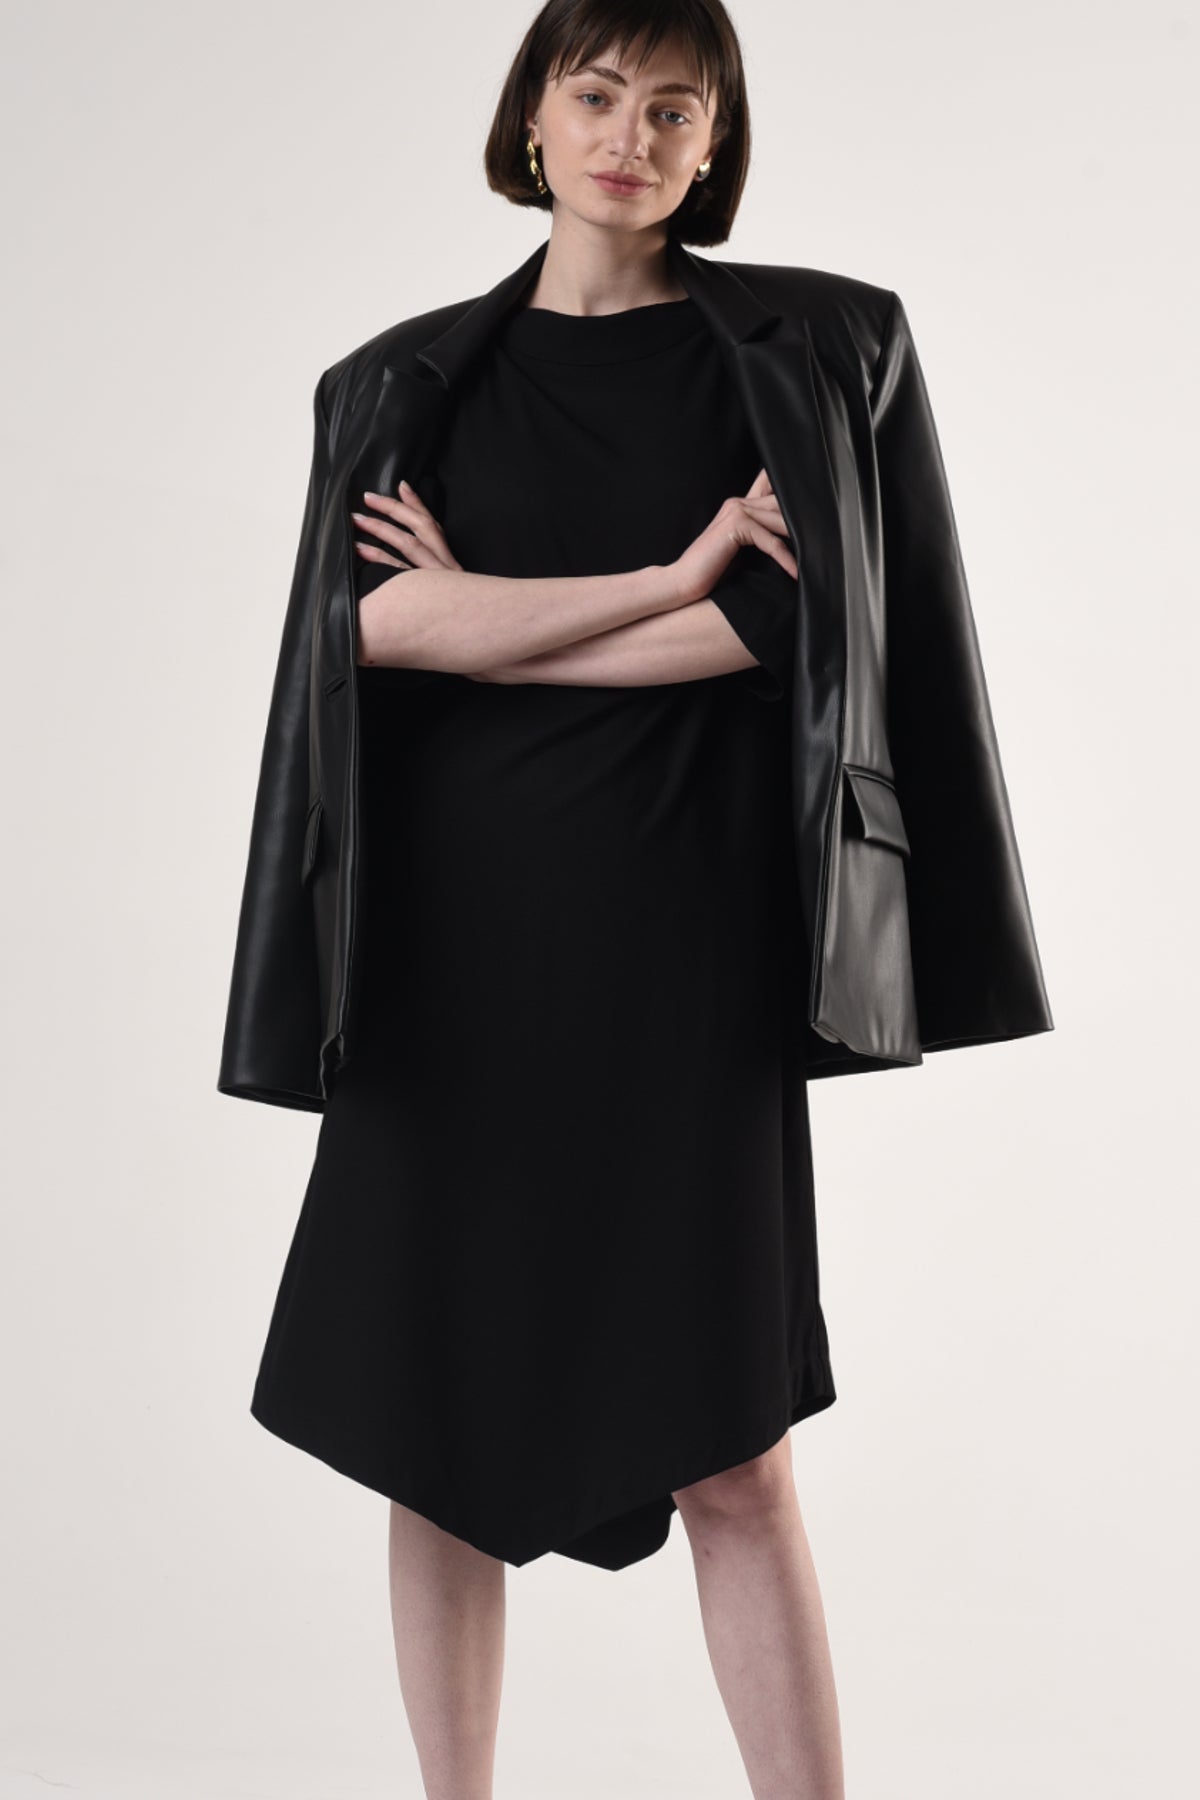 Suzi | Belted Angle Dress with Boat Neckline in Black